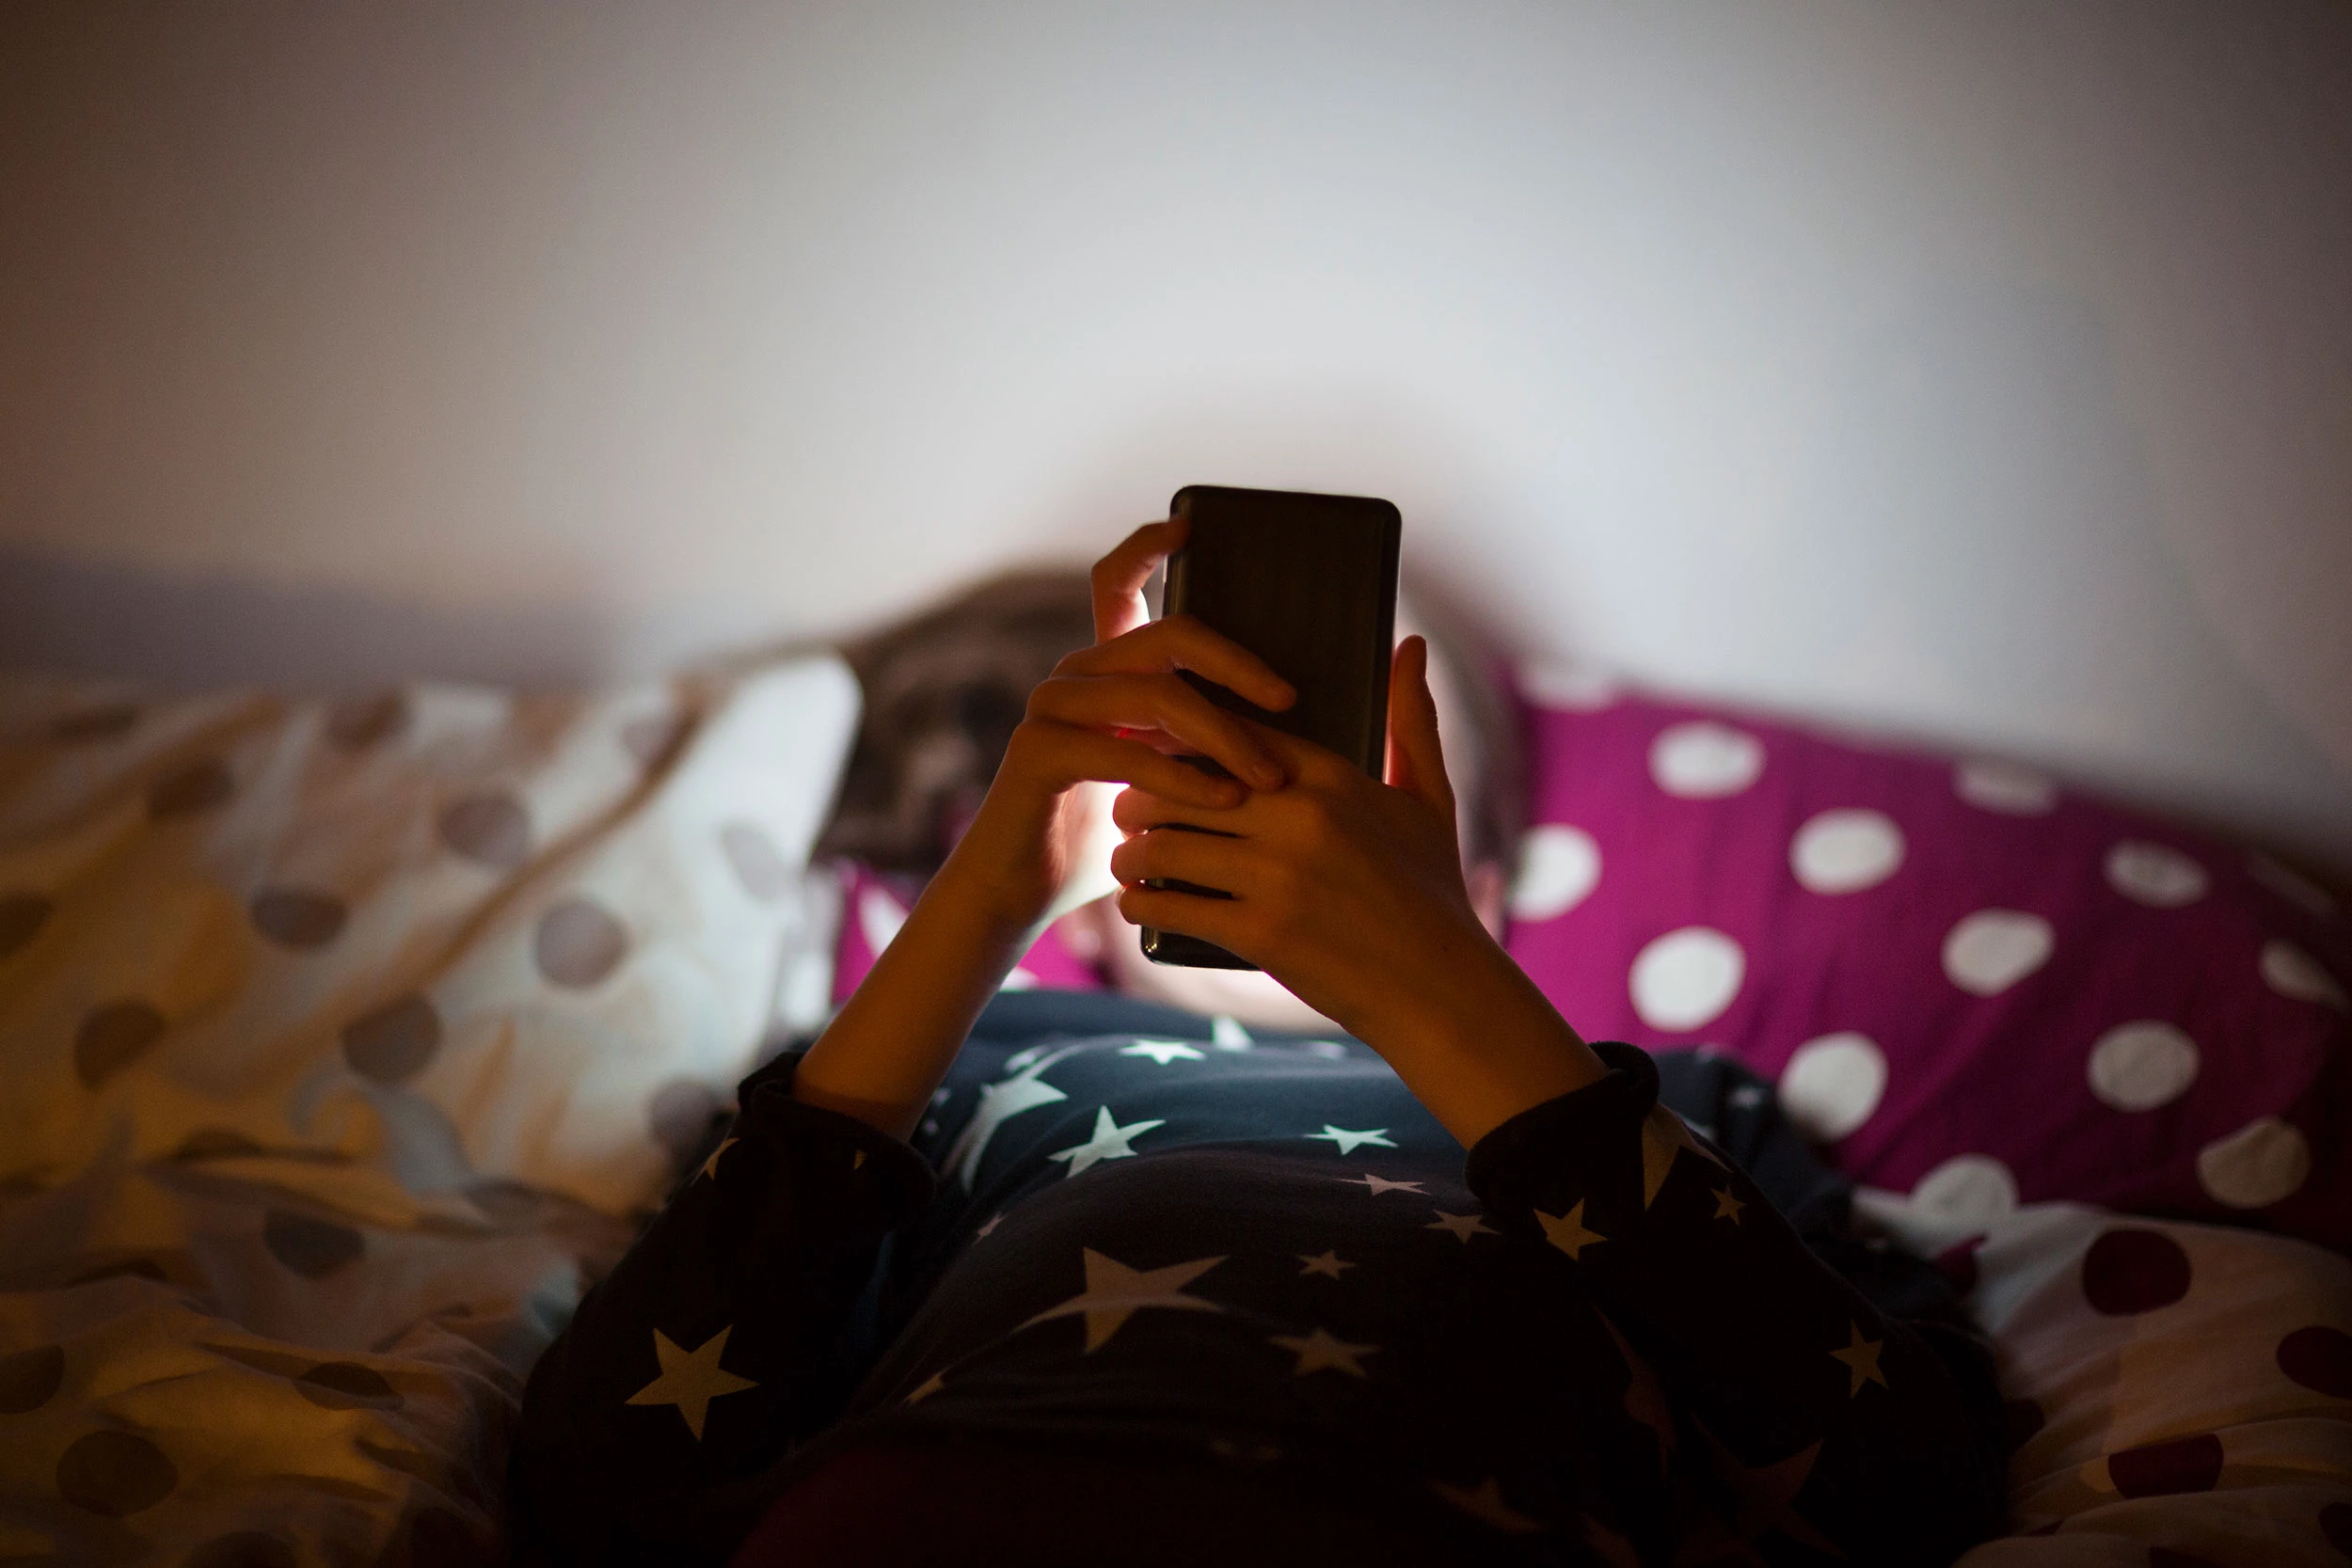 Child looking at phone on bed